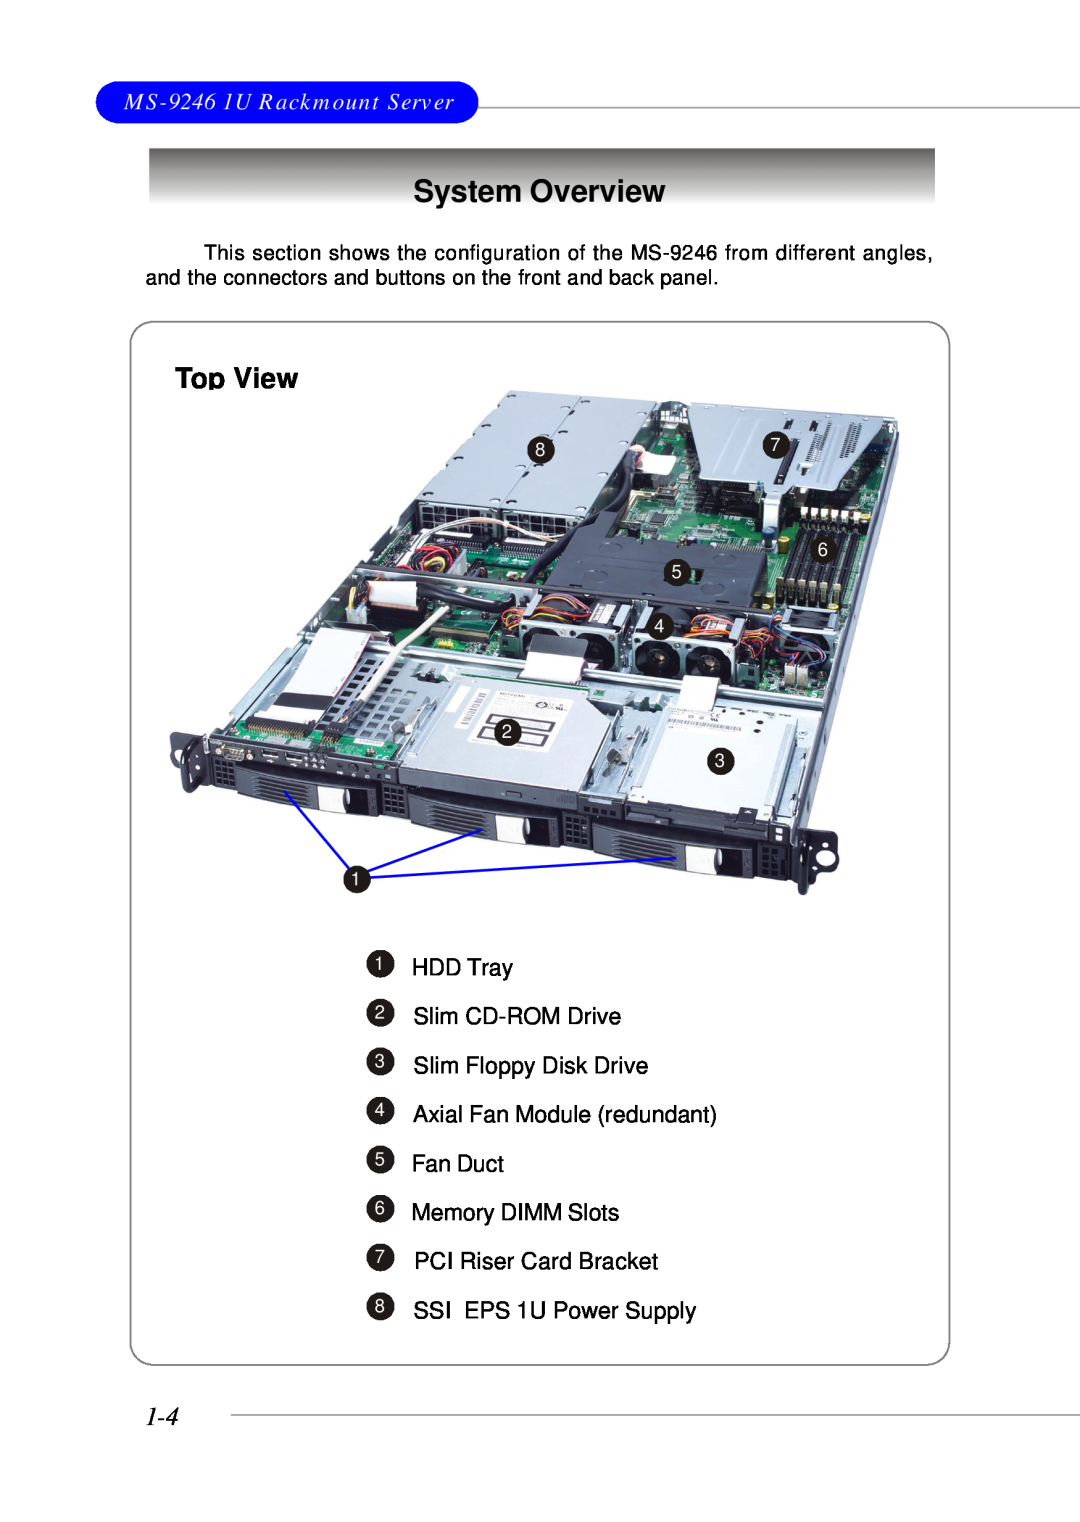 MSI manual System Overview, Top View, MS-9246 1U Rackmount Server, HDD Tray 2 Slim CD-ROM Drive 3 Slim Floppy Disk Drive 